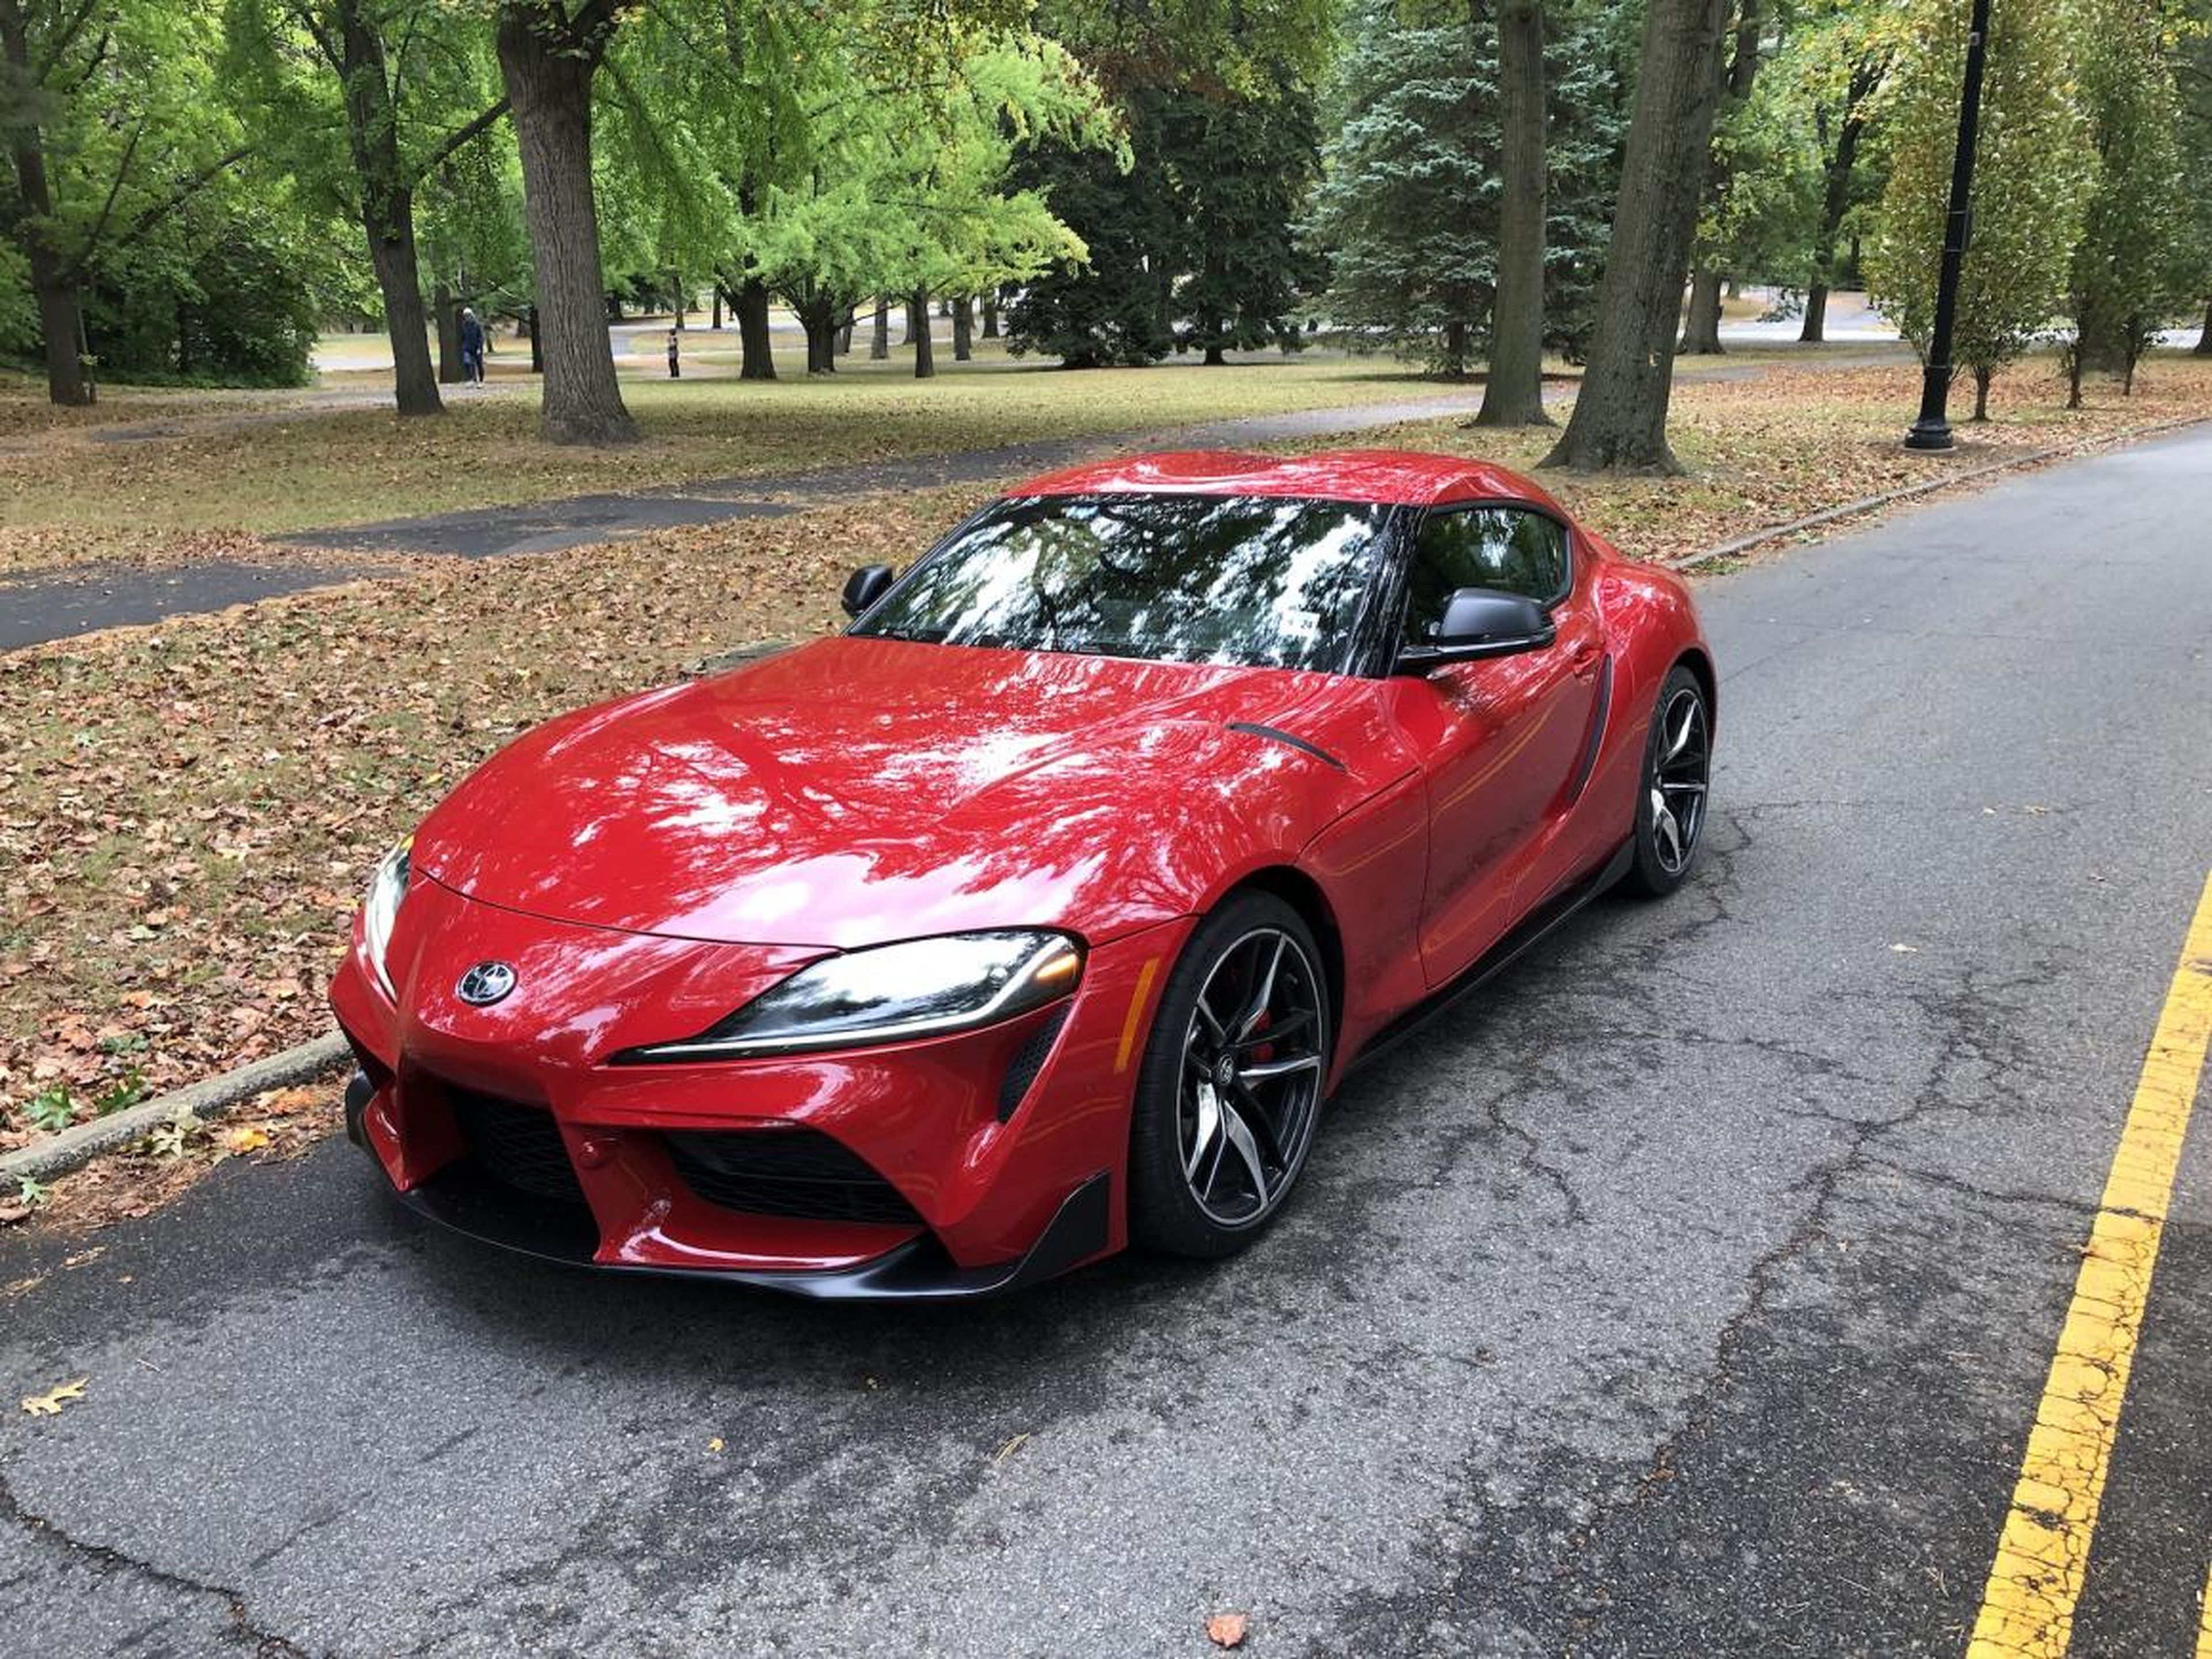 The 2020 GR Toyota Supra arrived in a "Renaissance Red" paint job and with an as-tested price of $56,220, a bit of a premium over the $49,990 base model.